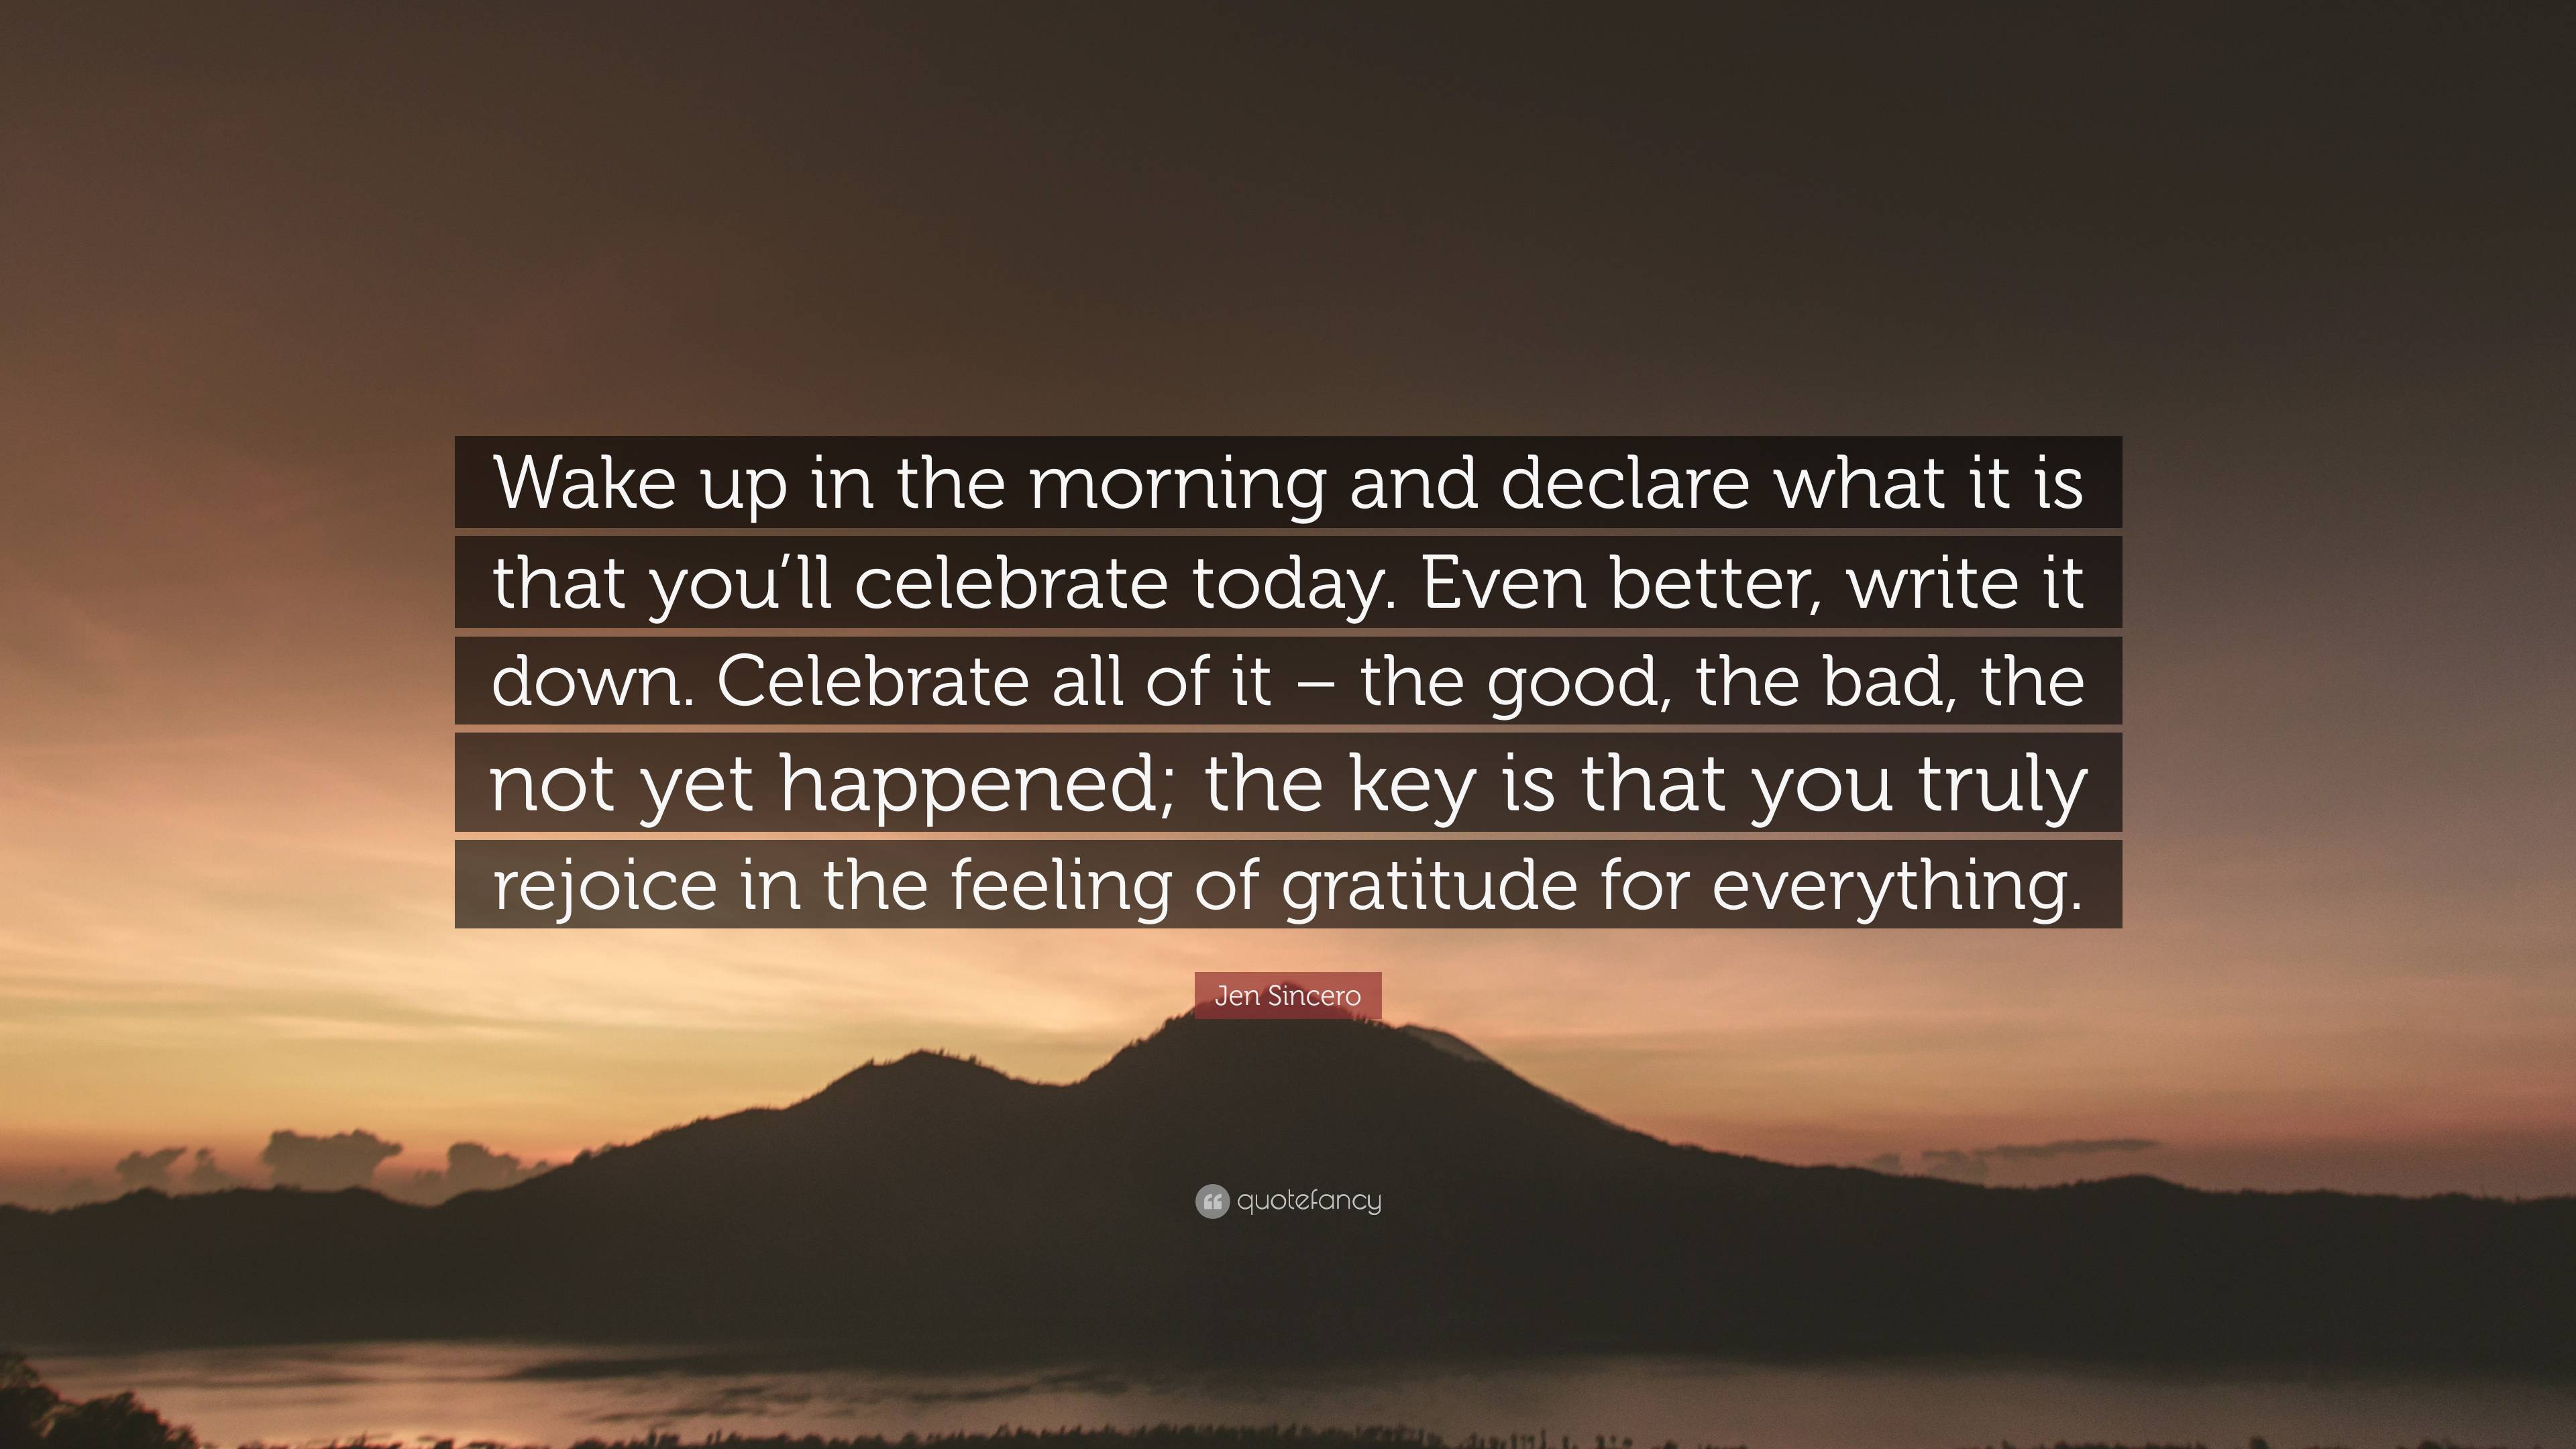 Jen Sincero Quote: “Wake up in the morning and declare what it is that ...